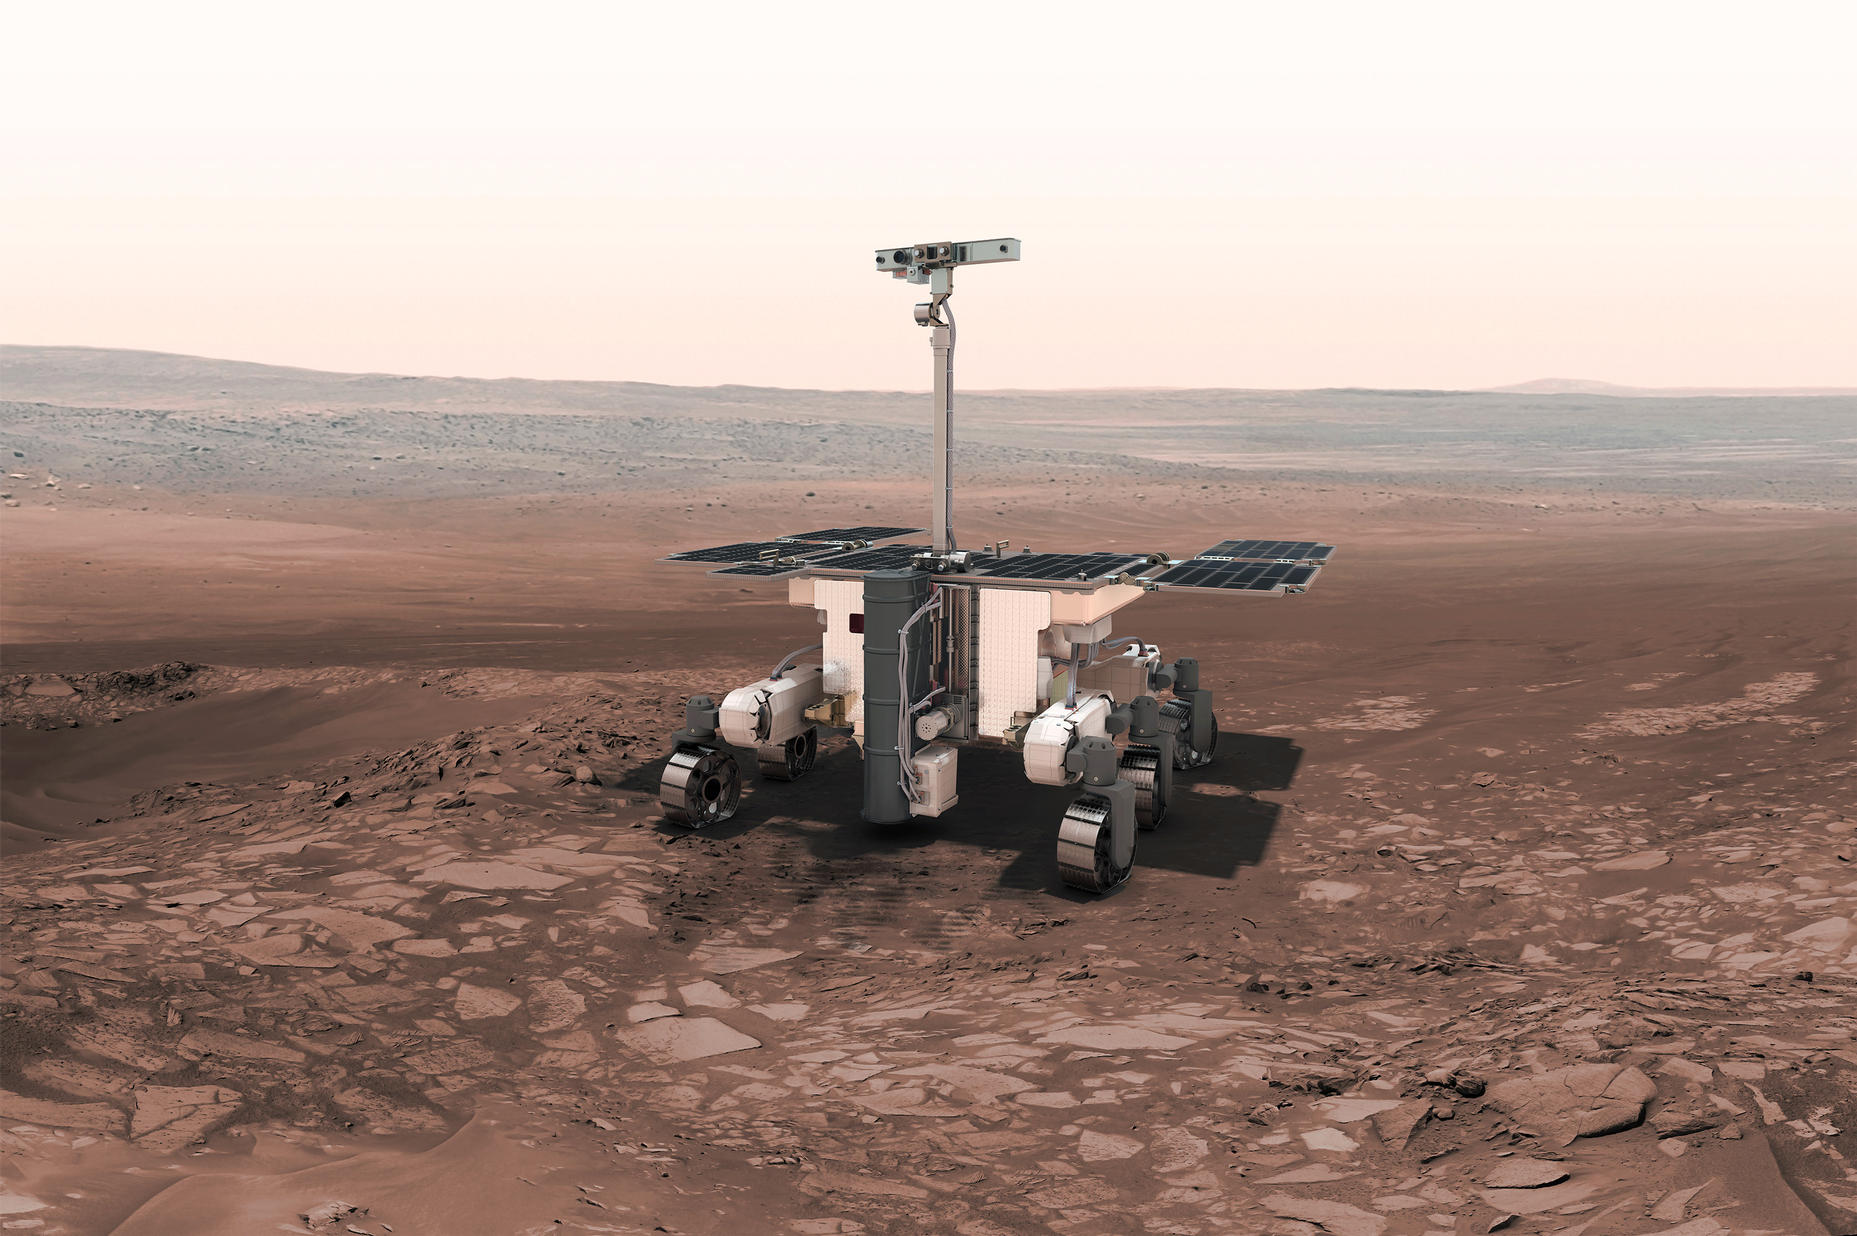 ESA's ExoMars Rover provides key mission capabilities: surface mobility, subsurface drilling and automatic sample collection, processing, and distribution to instruments.